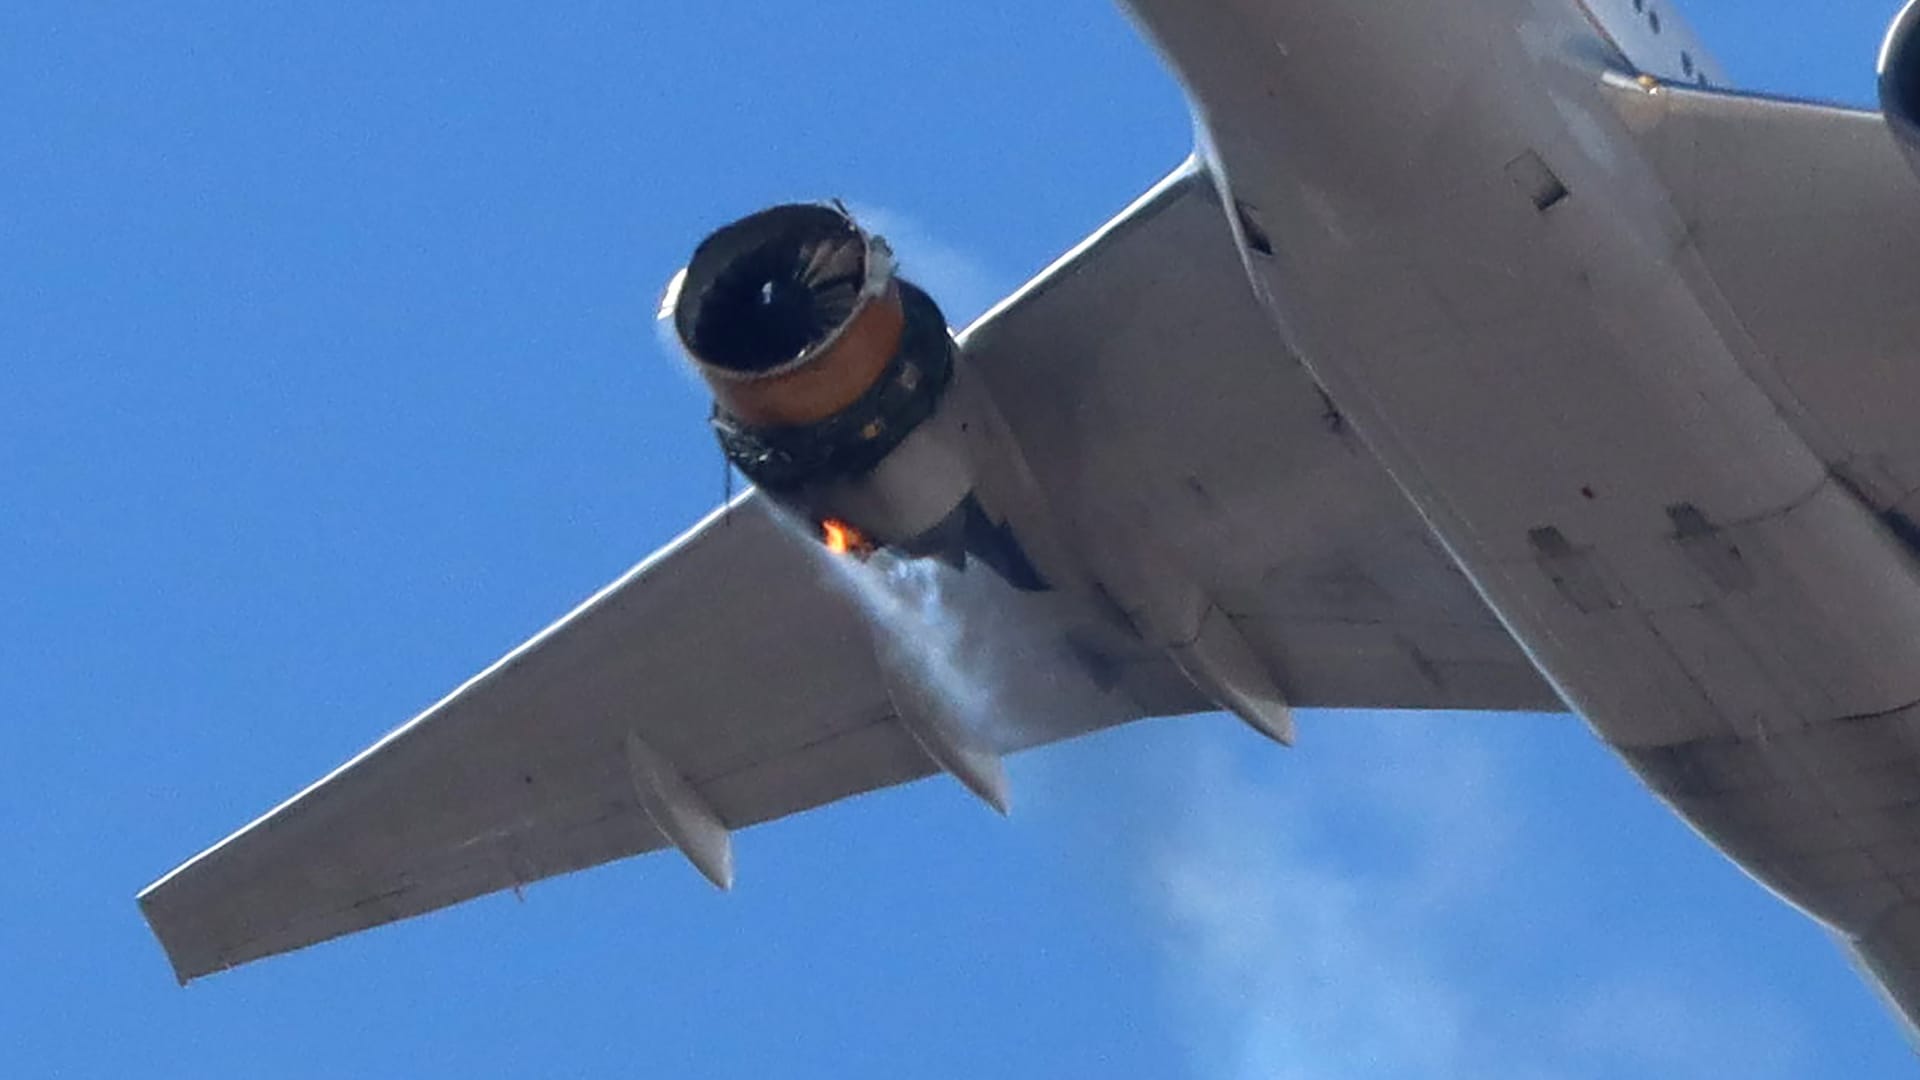 United Airlines flight UA328, carrying 231 passengers and 10 crew on board, returns to Denver International Airport with its starboard engine on fire after it called a Mayday alert, over Denver, Colorado, U.S. February 20, 2021.